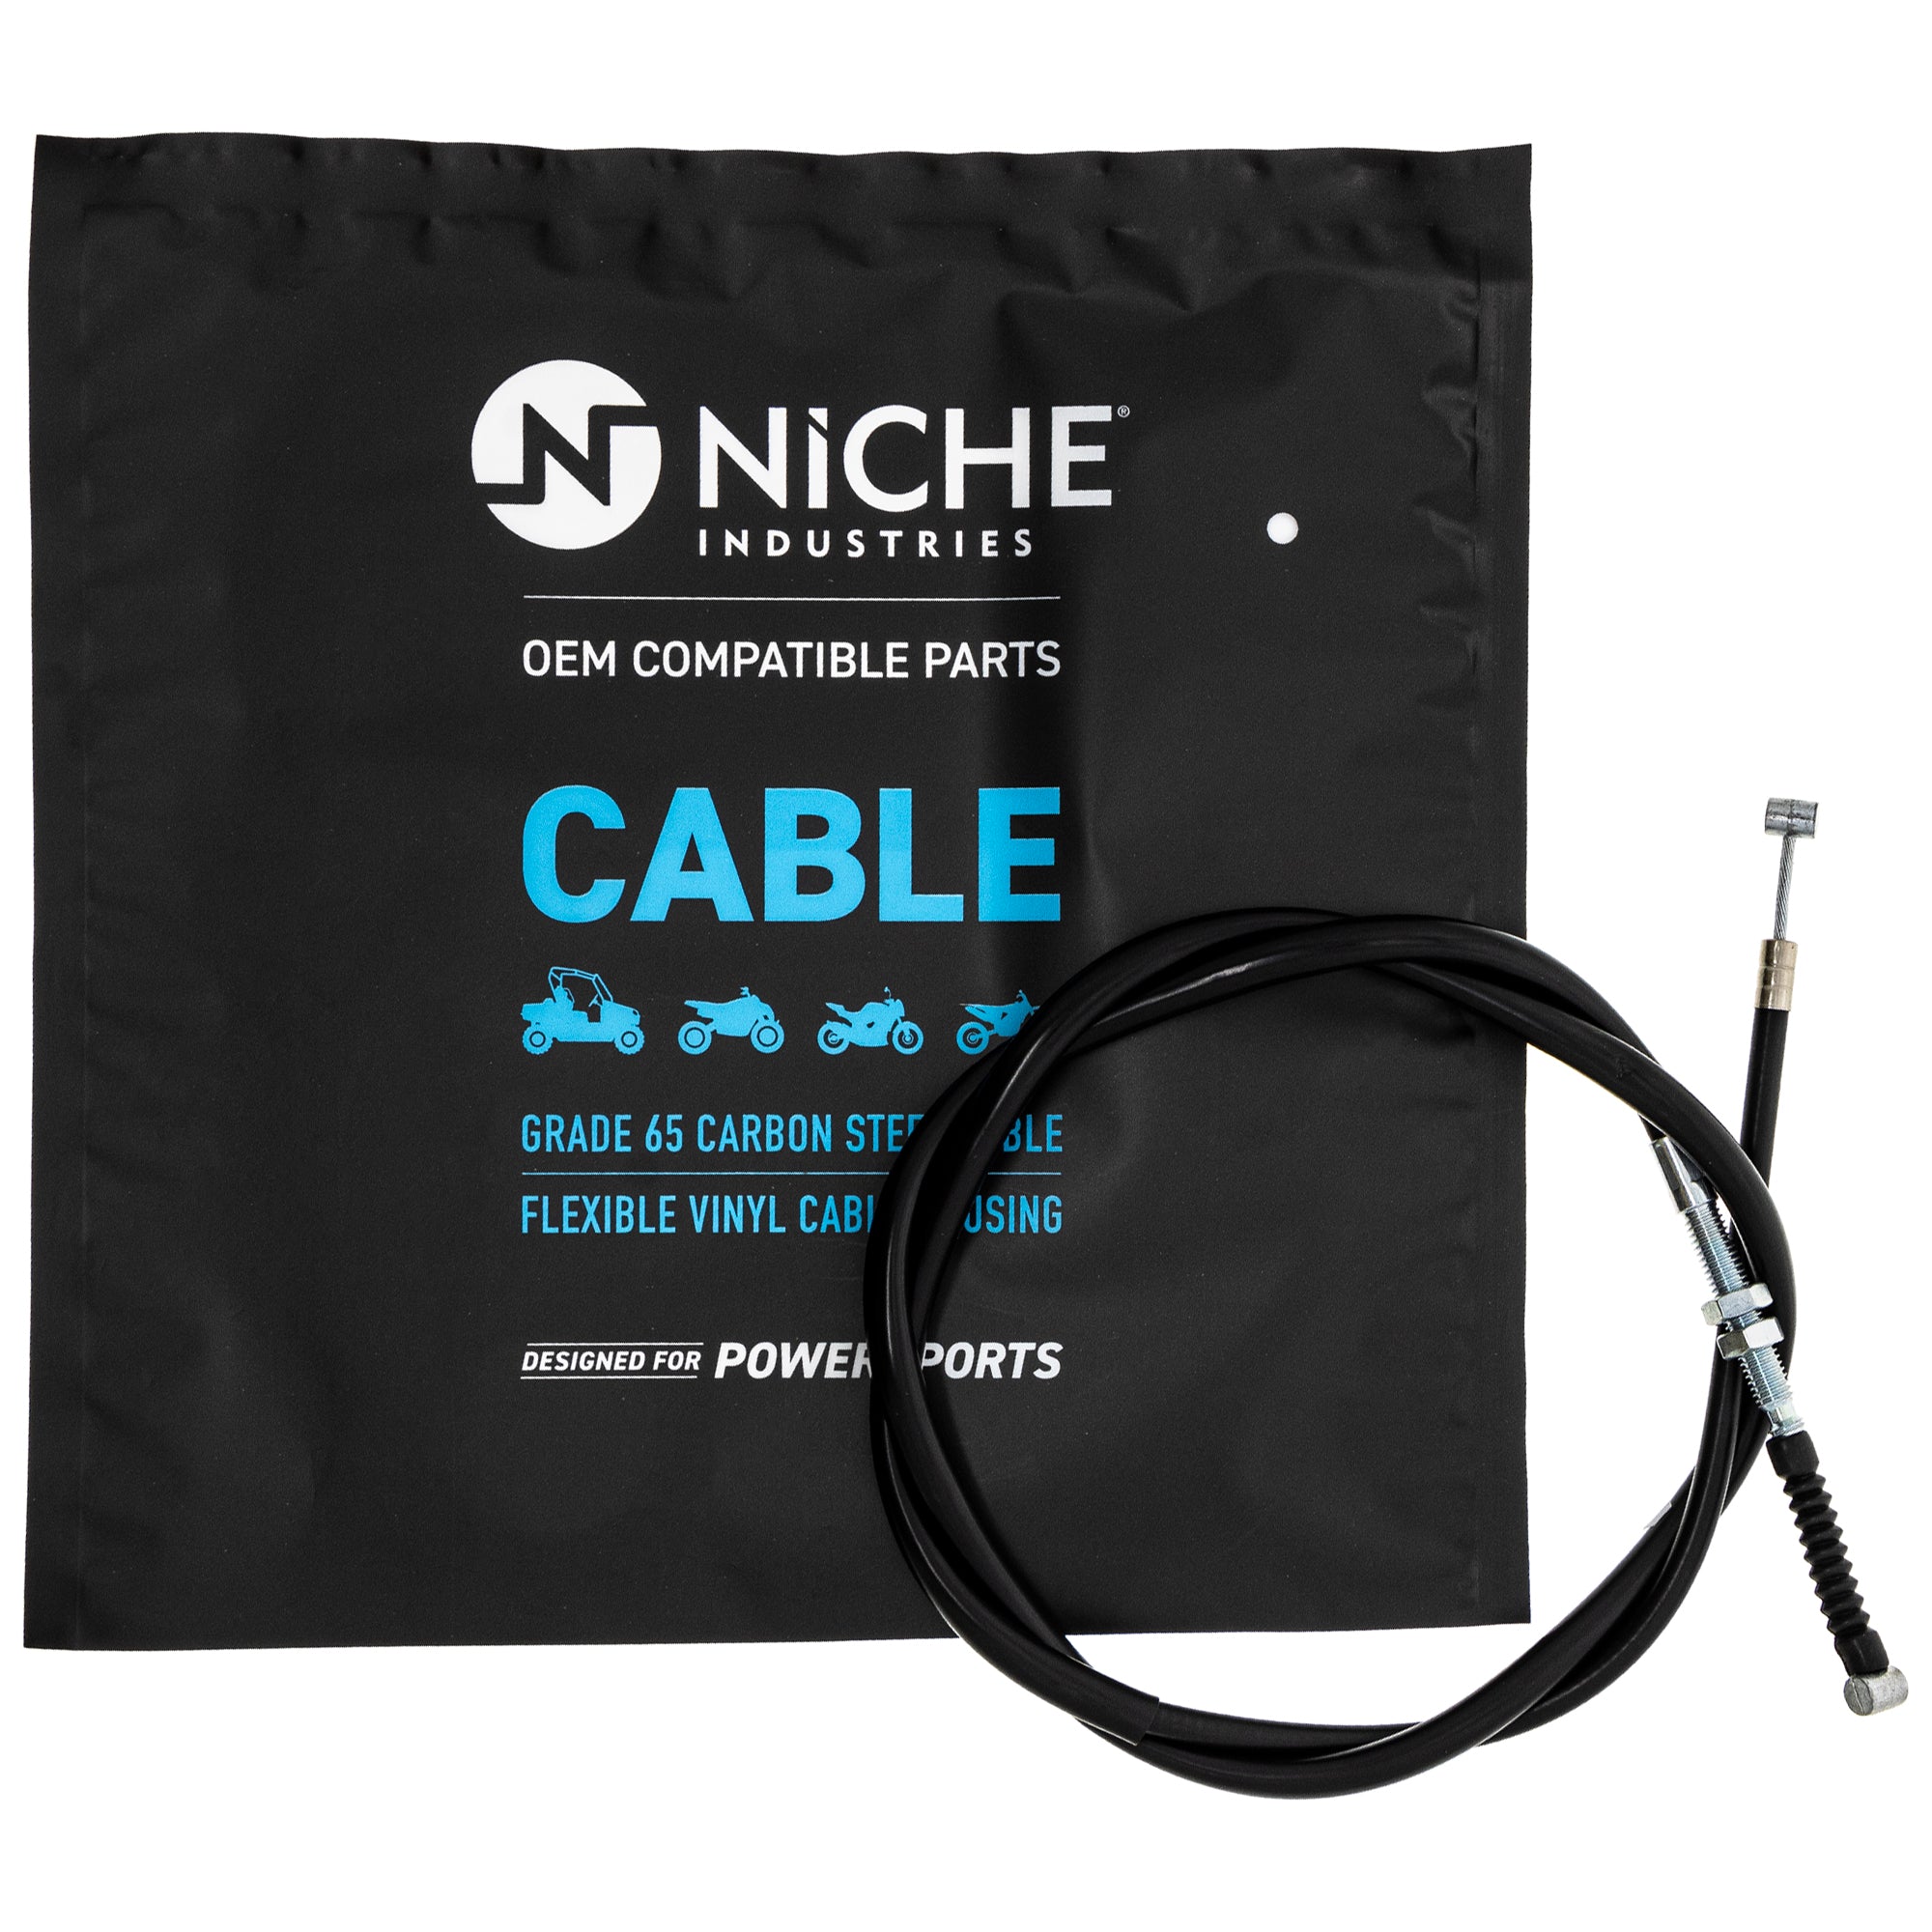 NICHE 519-CCB2845L Clutch Cable for zOTHER Silver CX500 Custom